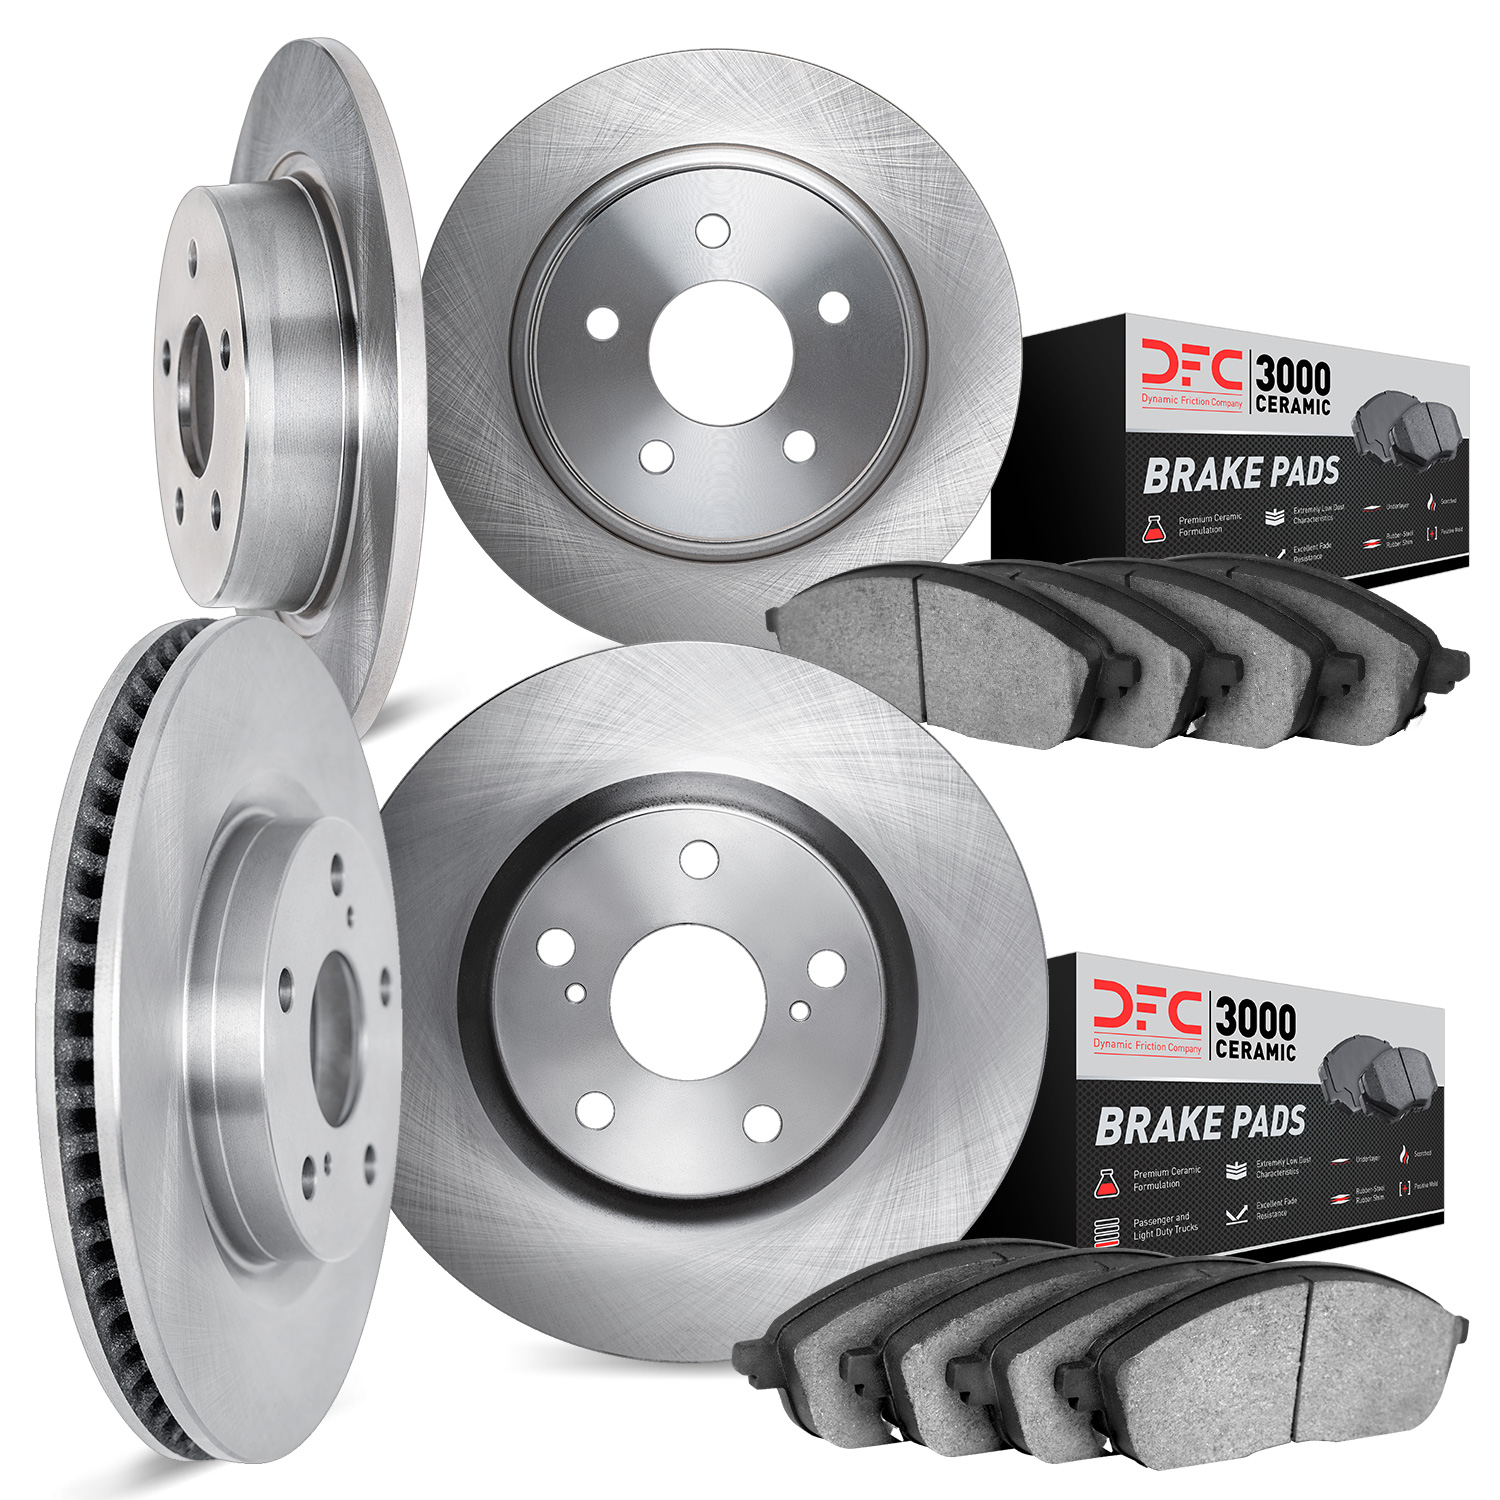 6304-59086 Brake Rotors with 3000-Series Ceramic Brake Pads Kit, Fits Select Acura/Honda, Position: Front and Rear